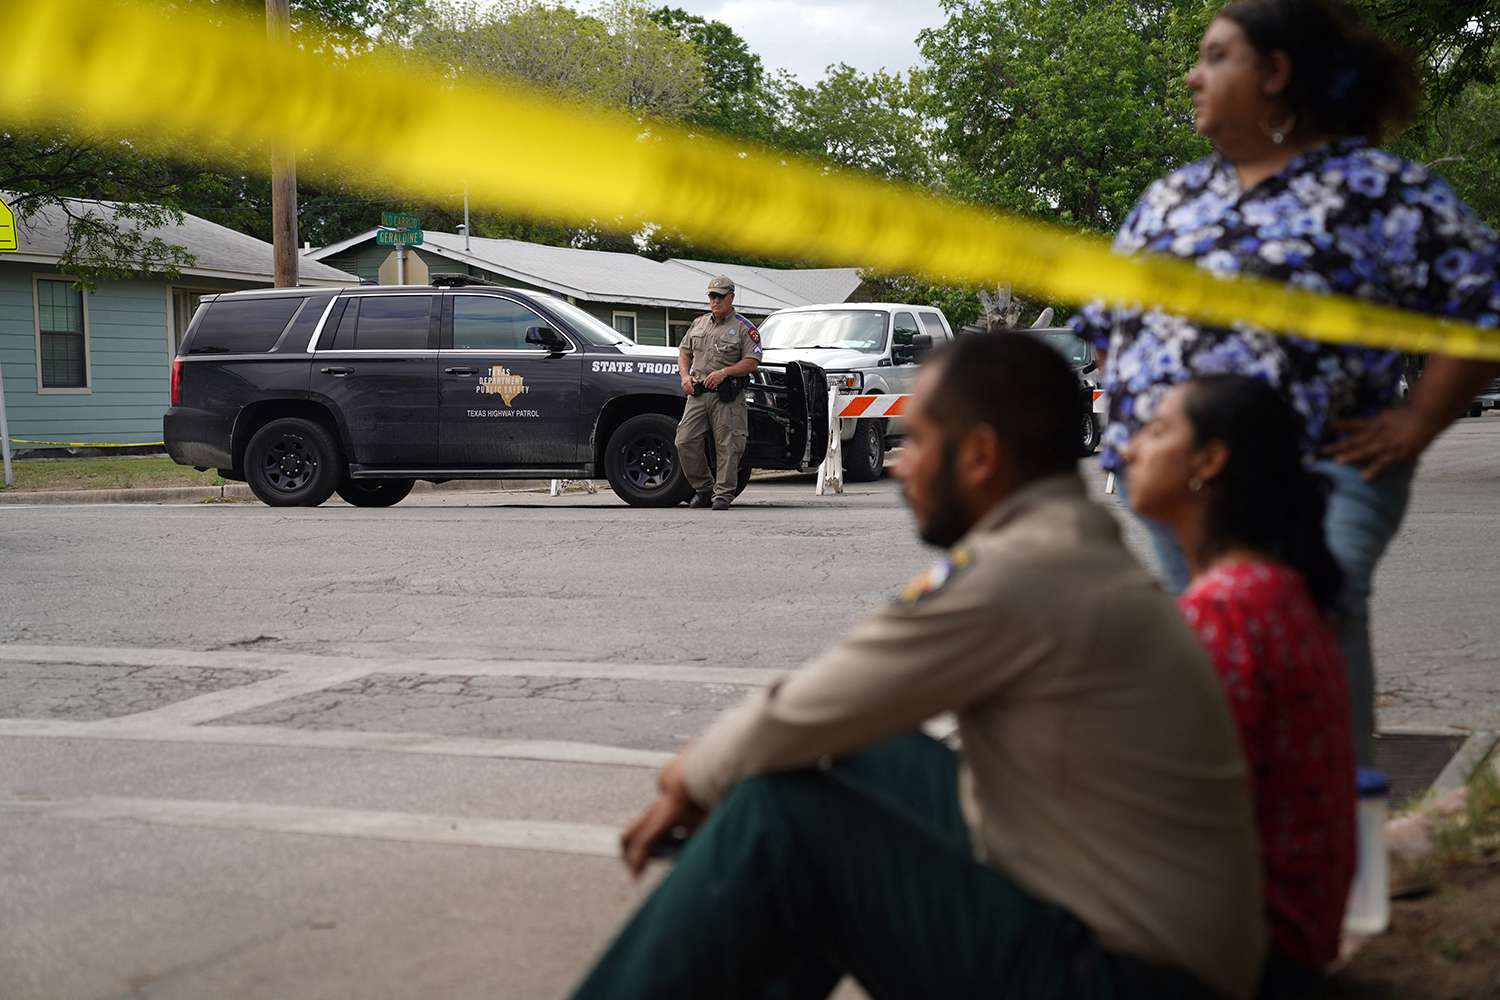 People sit on the curb outside of Robb Elementary School as State troopers guard the area in Uvalde, Texas, on May 24, 2022. - An 18-year-old gunman killed 14 children and a teacher at an elementary school in Texas on Tuesday, according to the state's governor, in the nation's deadliest school shooting in years.